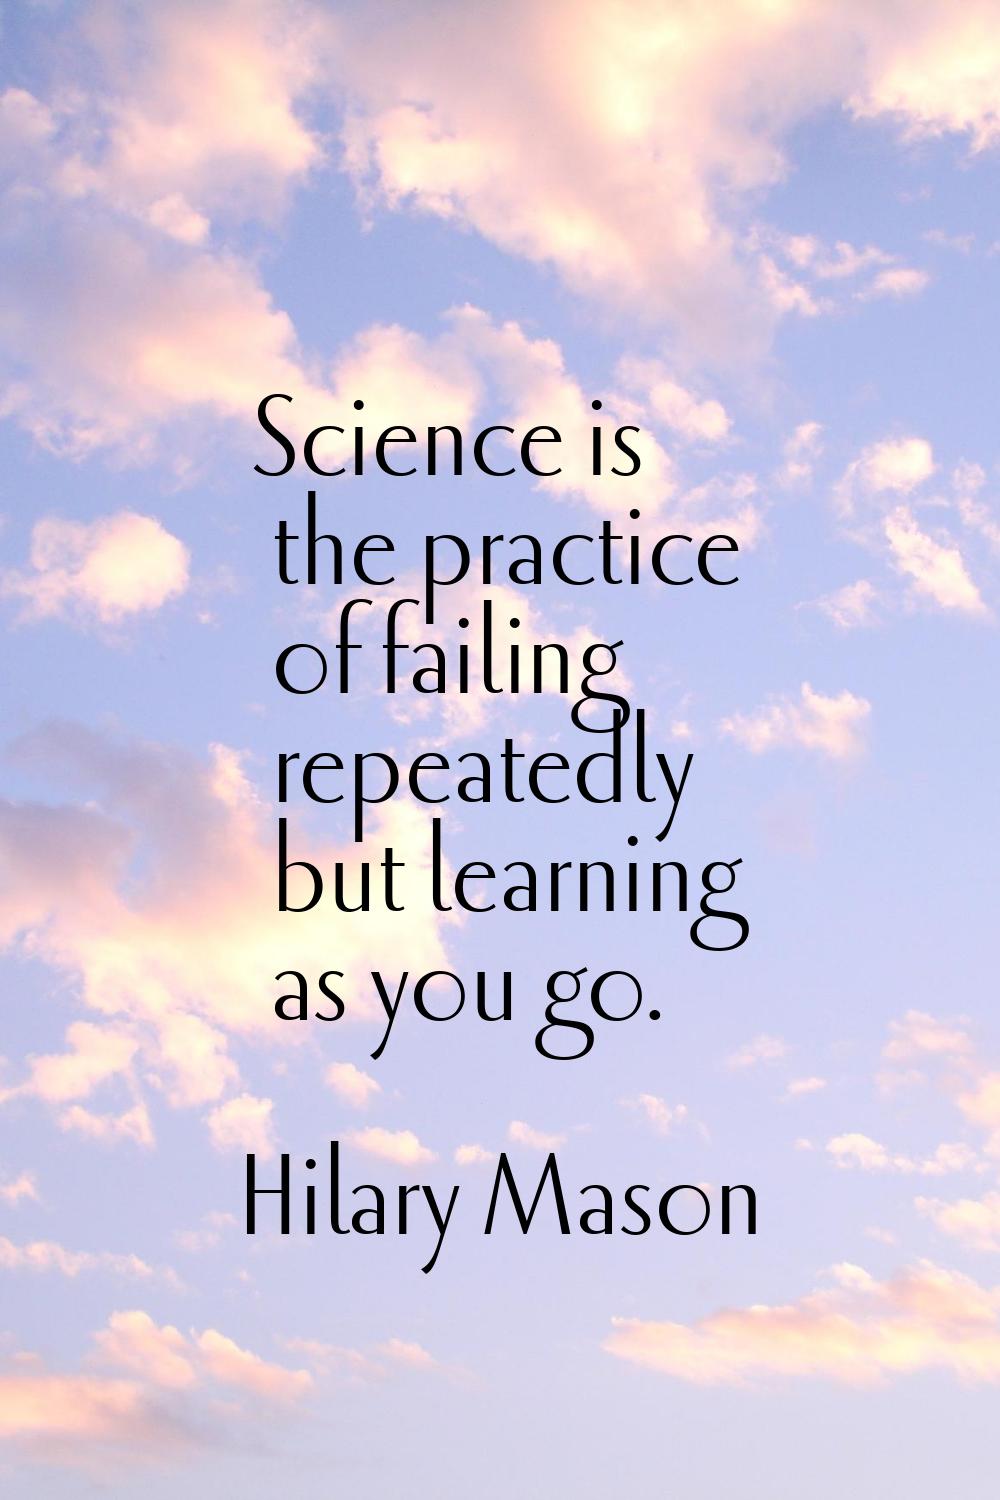 Science is the practice of failing repeatedly but learning as you go.